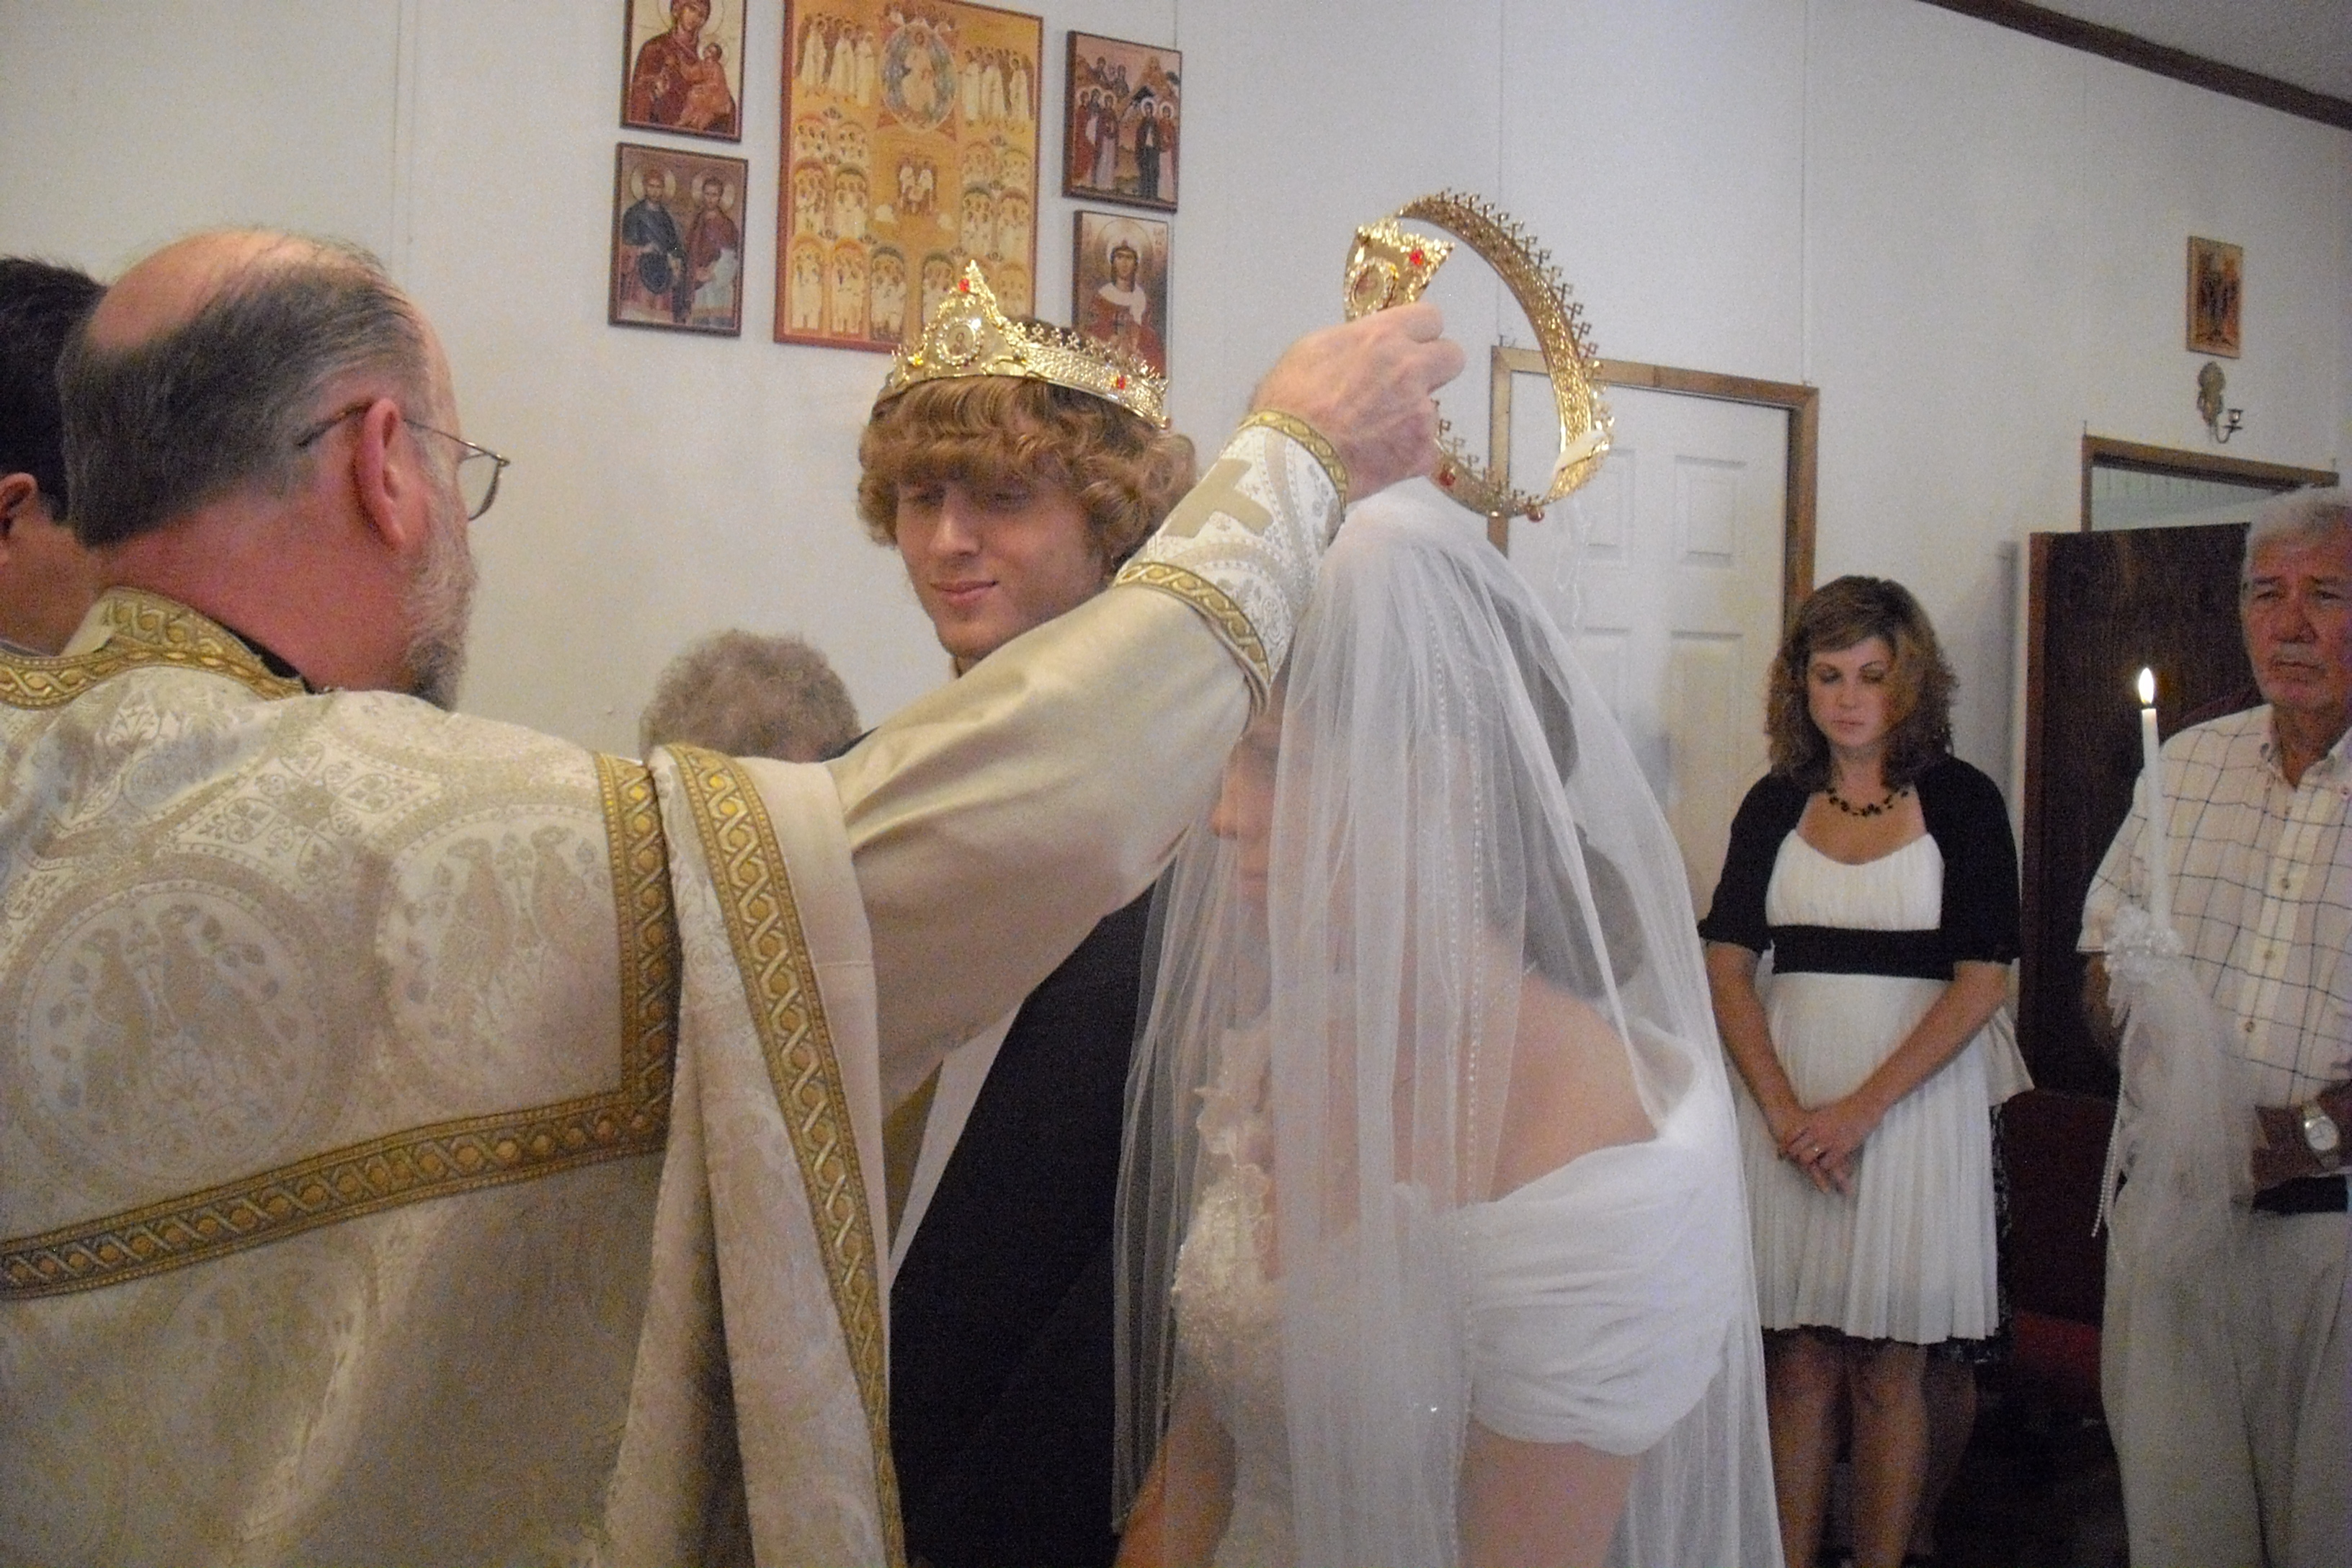 Crowning the Bride